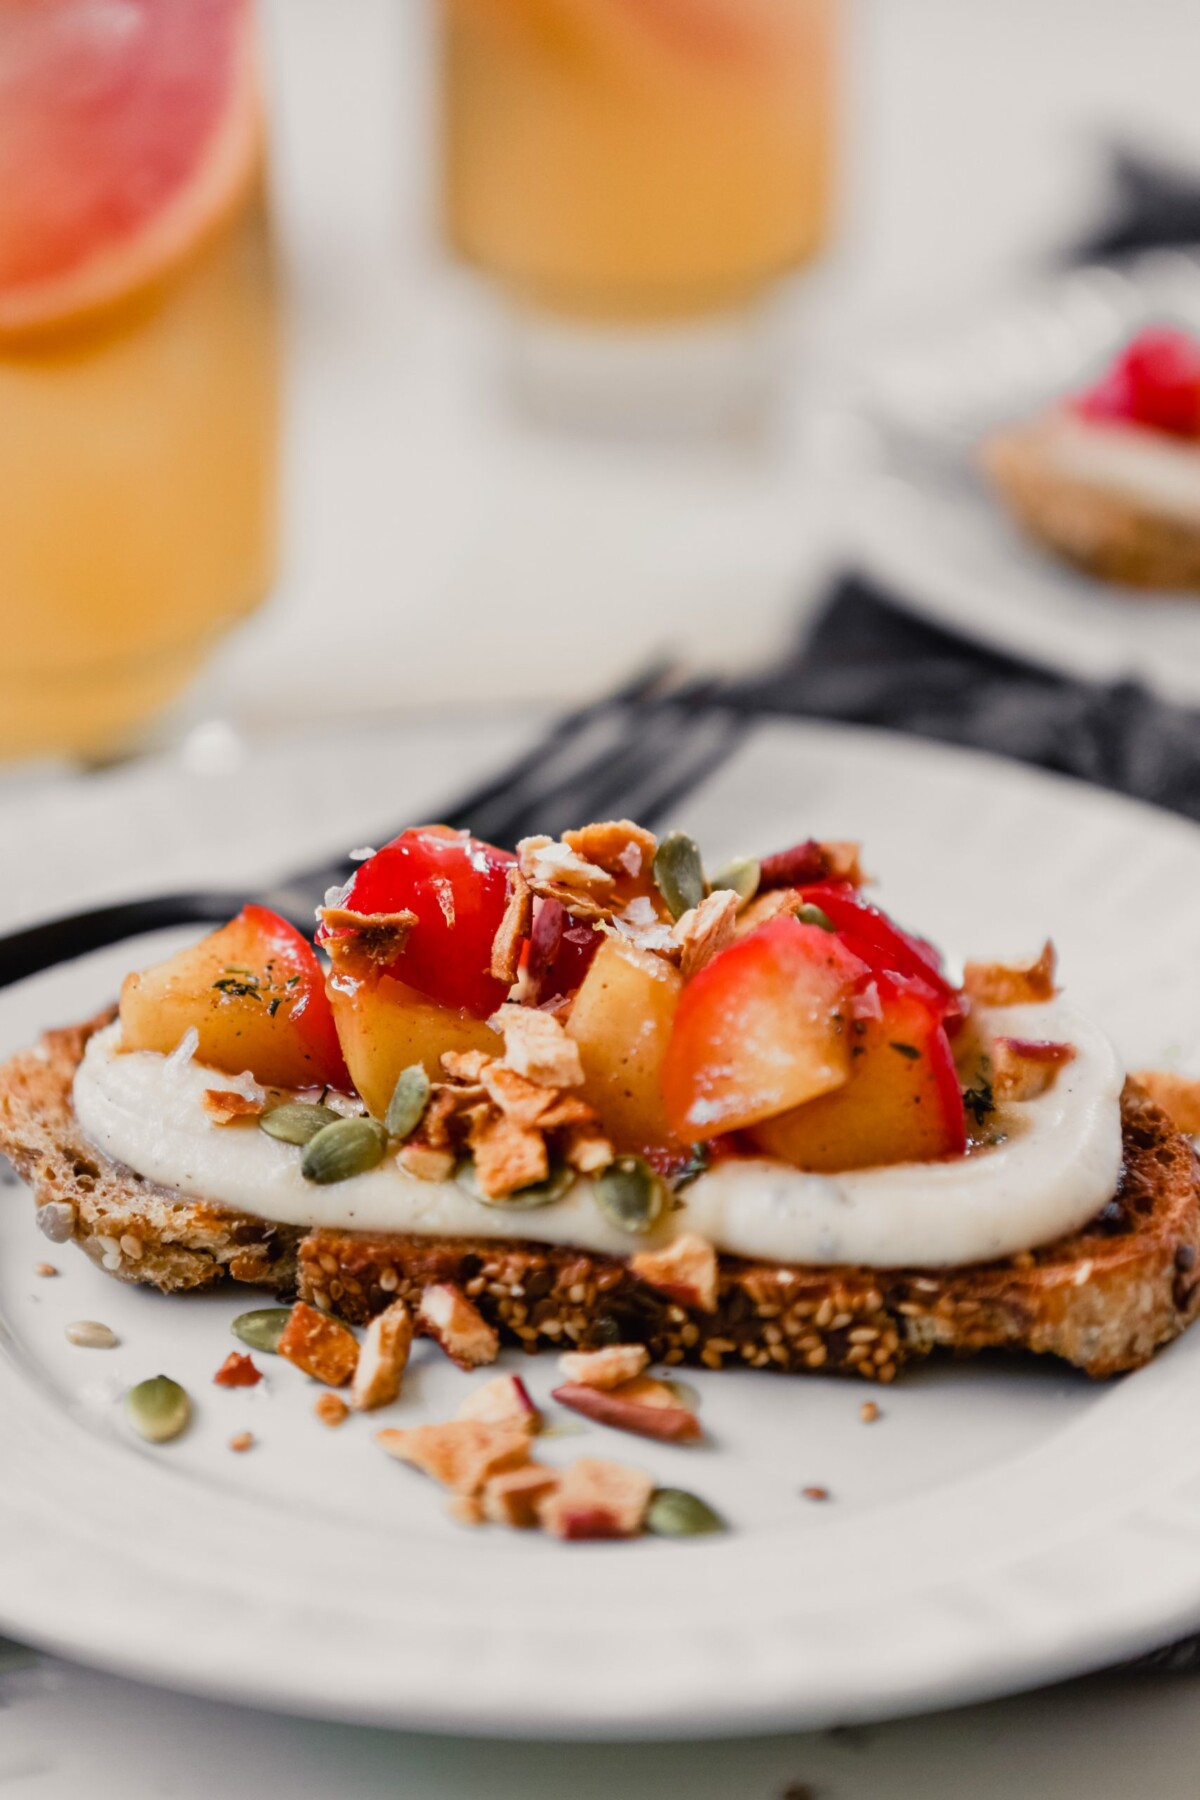 Photograph of wholegrain bread topped with ricotta, sauteed apples, and honey on a white plate